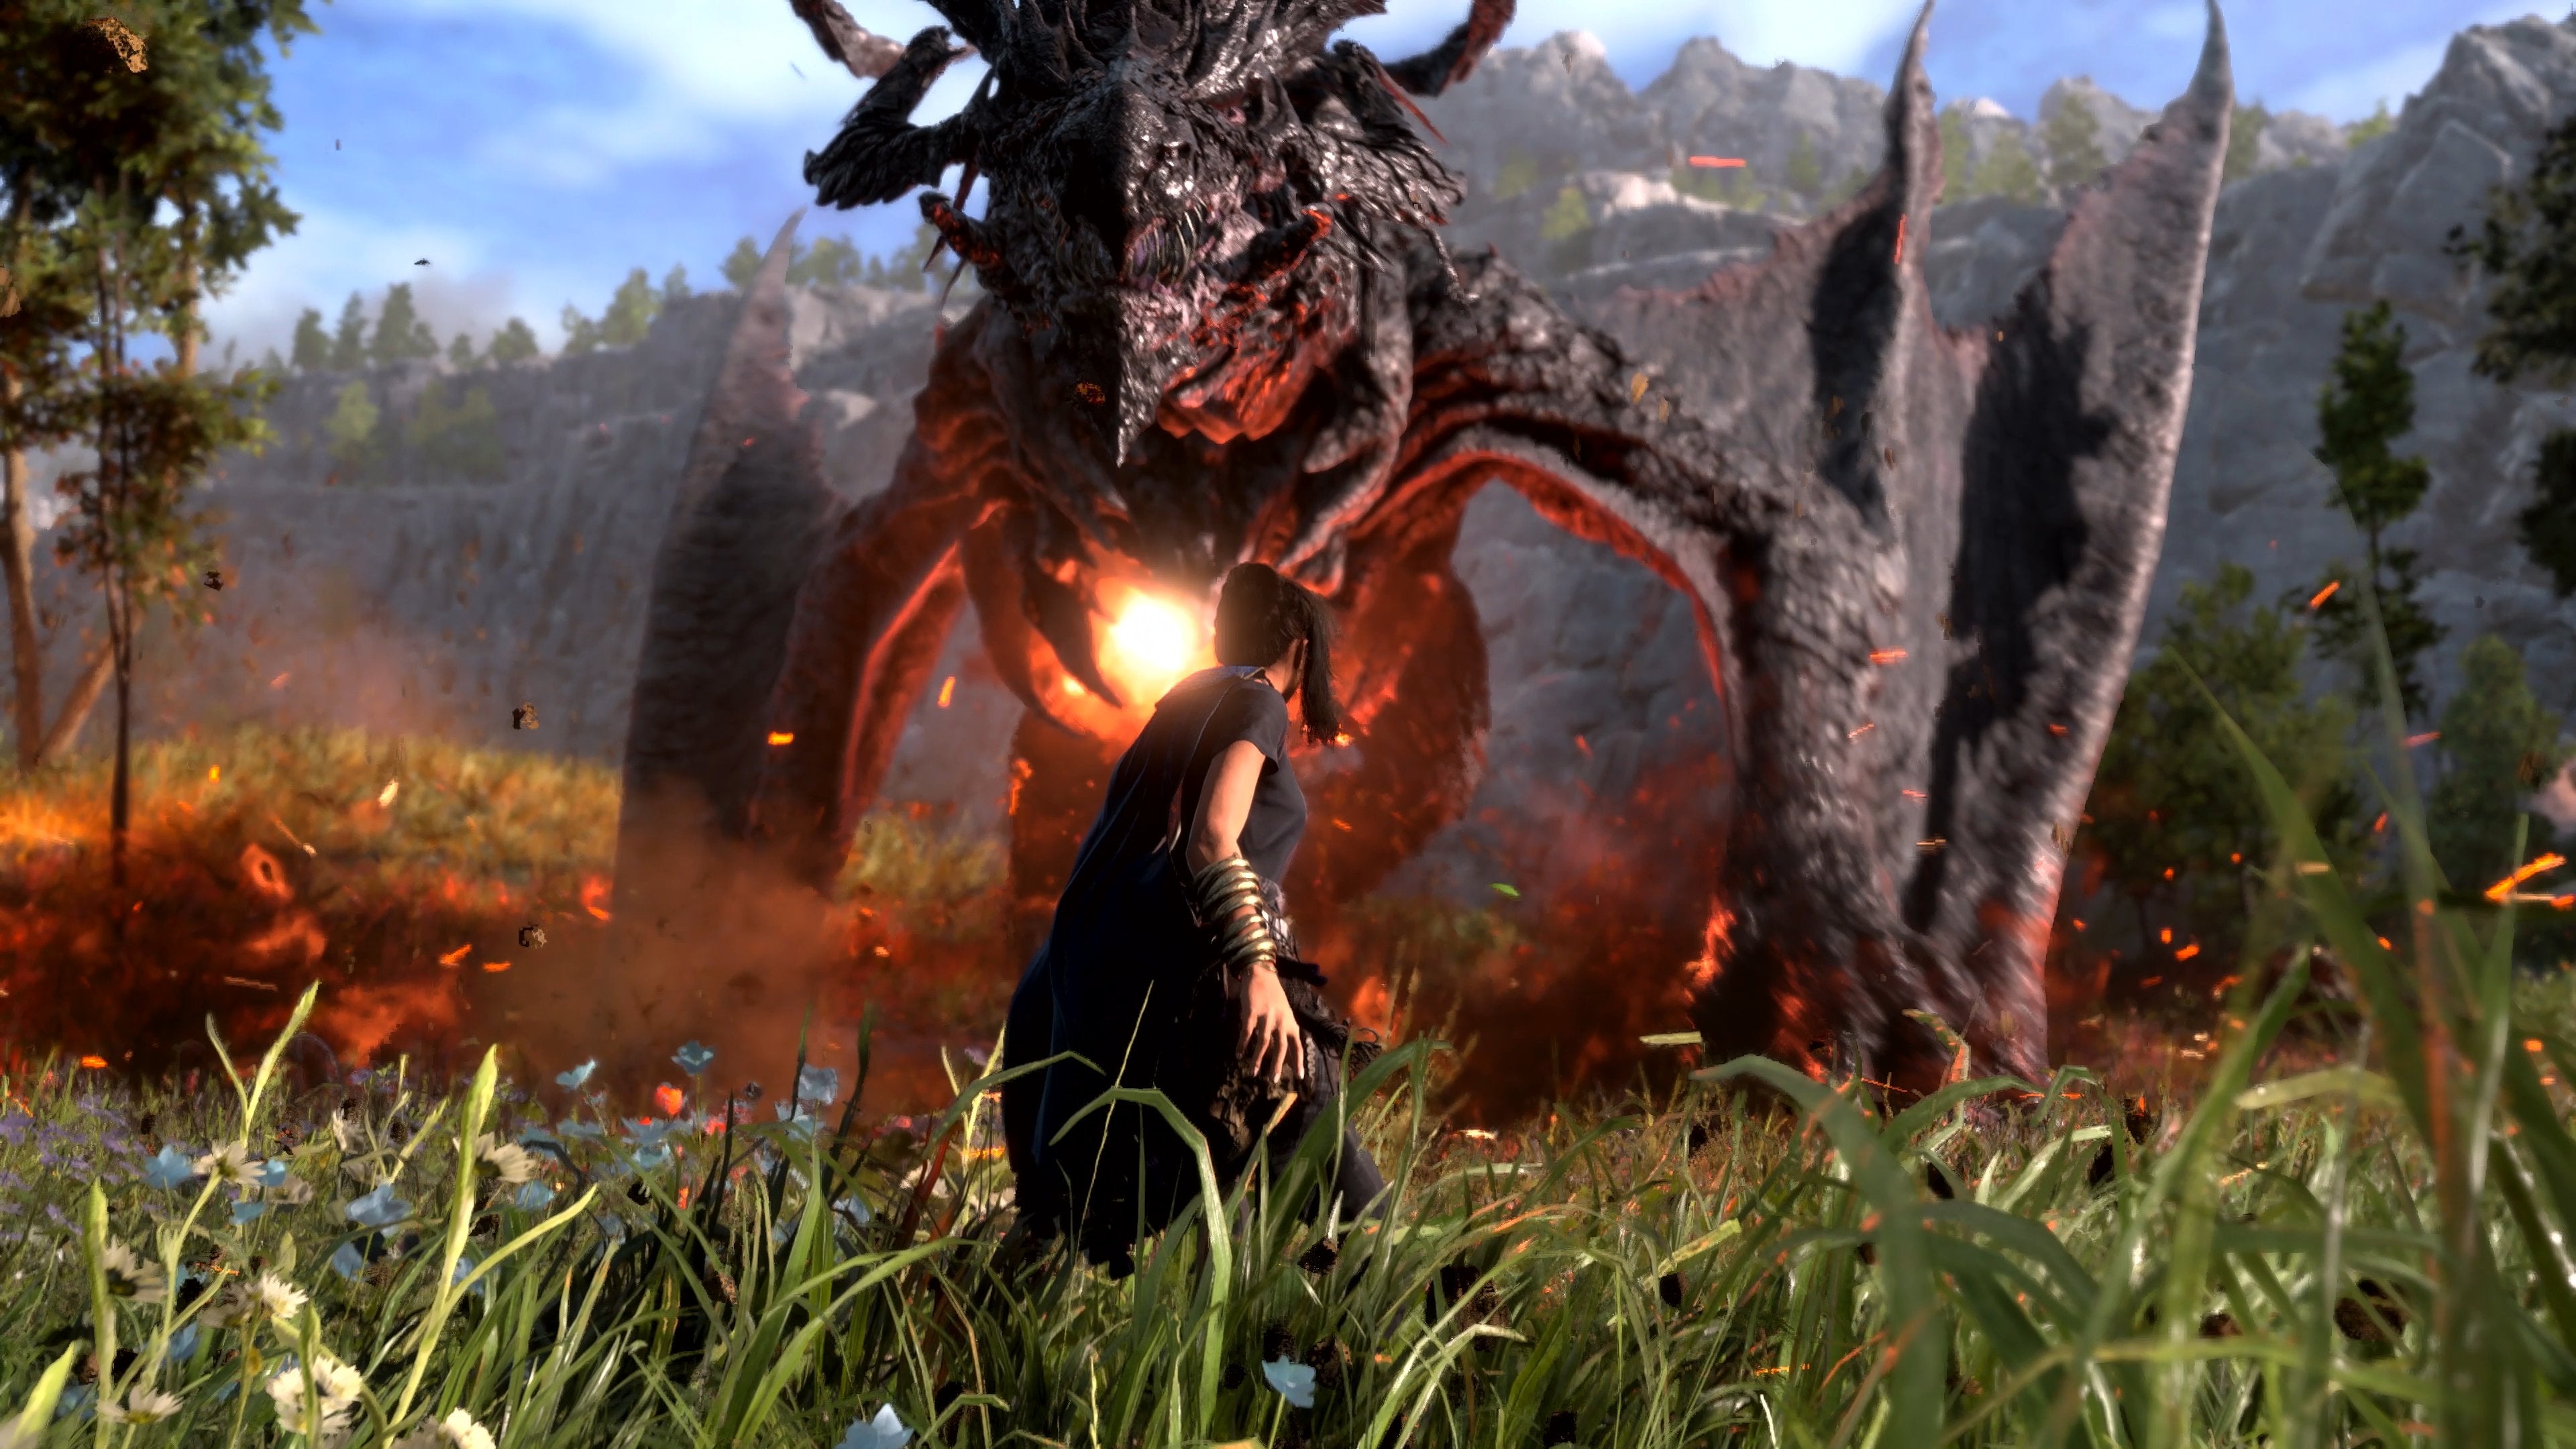 Frey faces off against a fearsome dragon in Forspoken